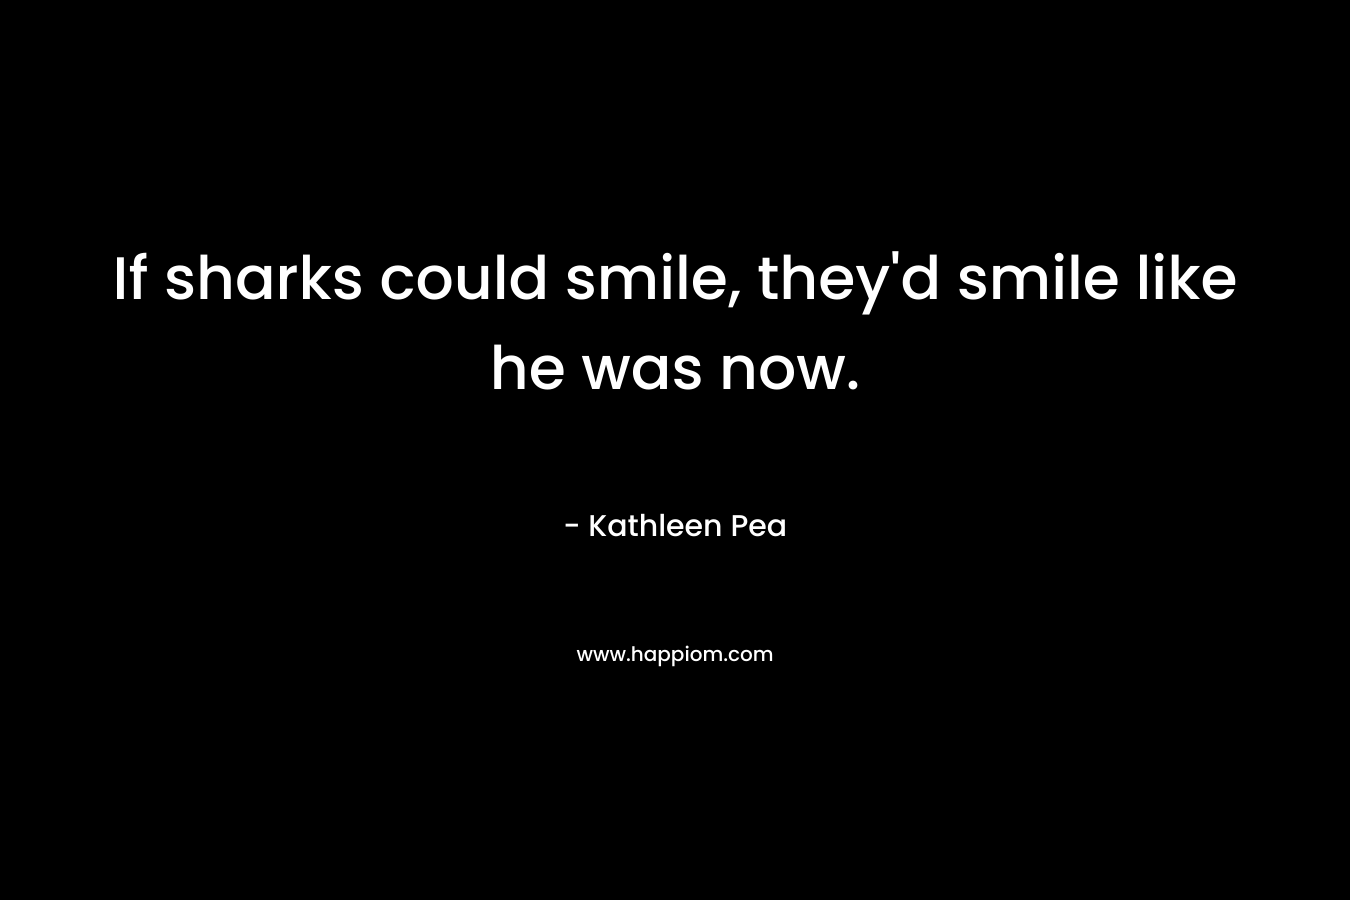 If sharks could smile, they’d smile like he was now. – Kathleen Pea